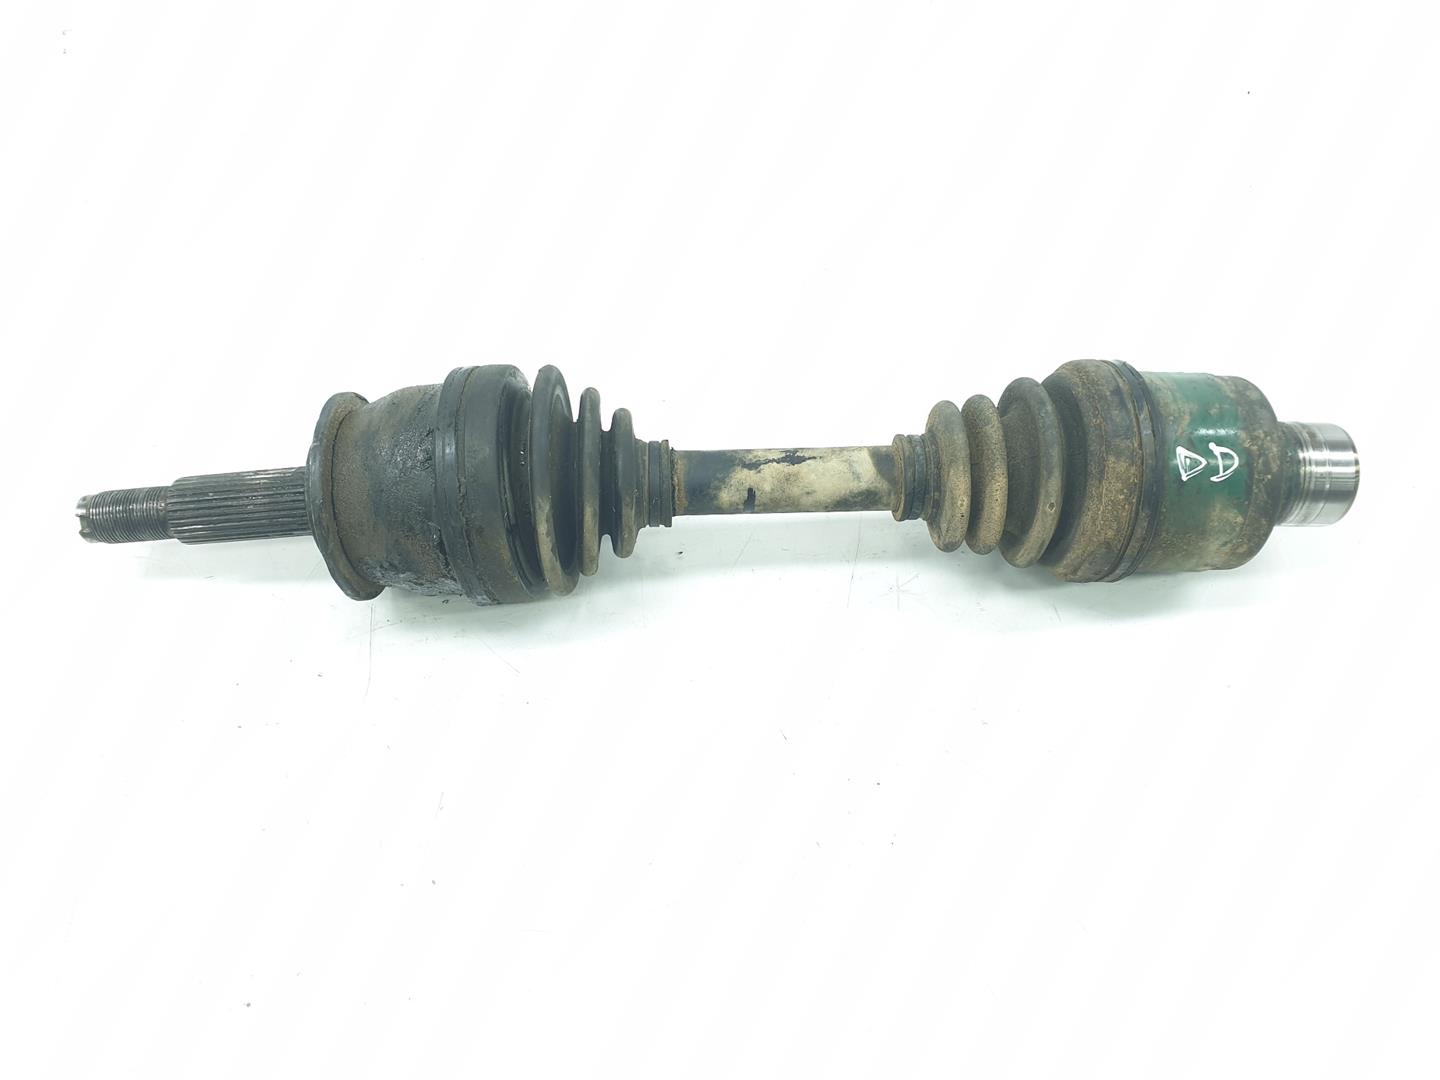 SSANGYONG Rexton Y200 (2001-2007) Front Right Driveshaft 4130008001, 4130008001 23910478